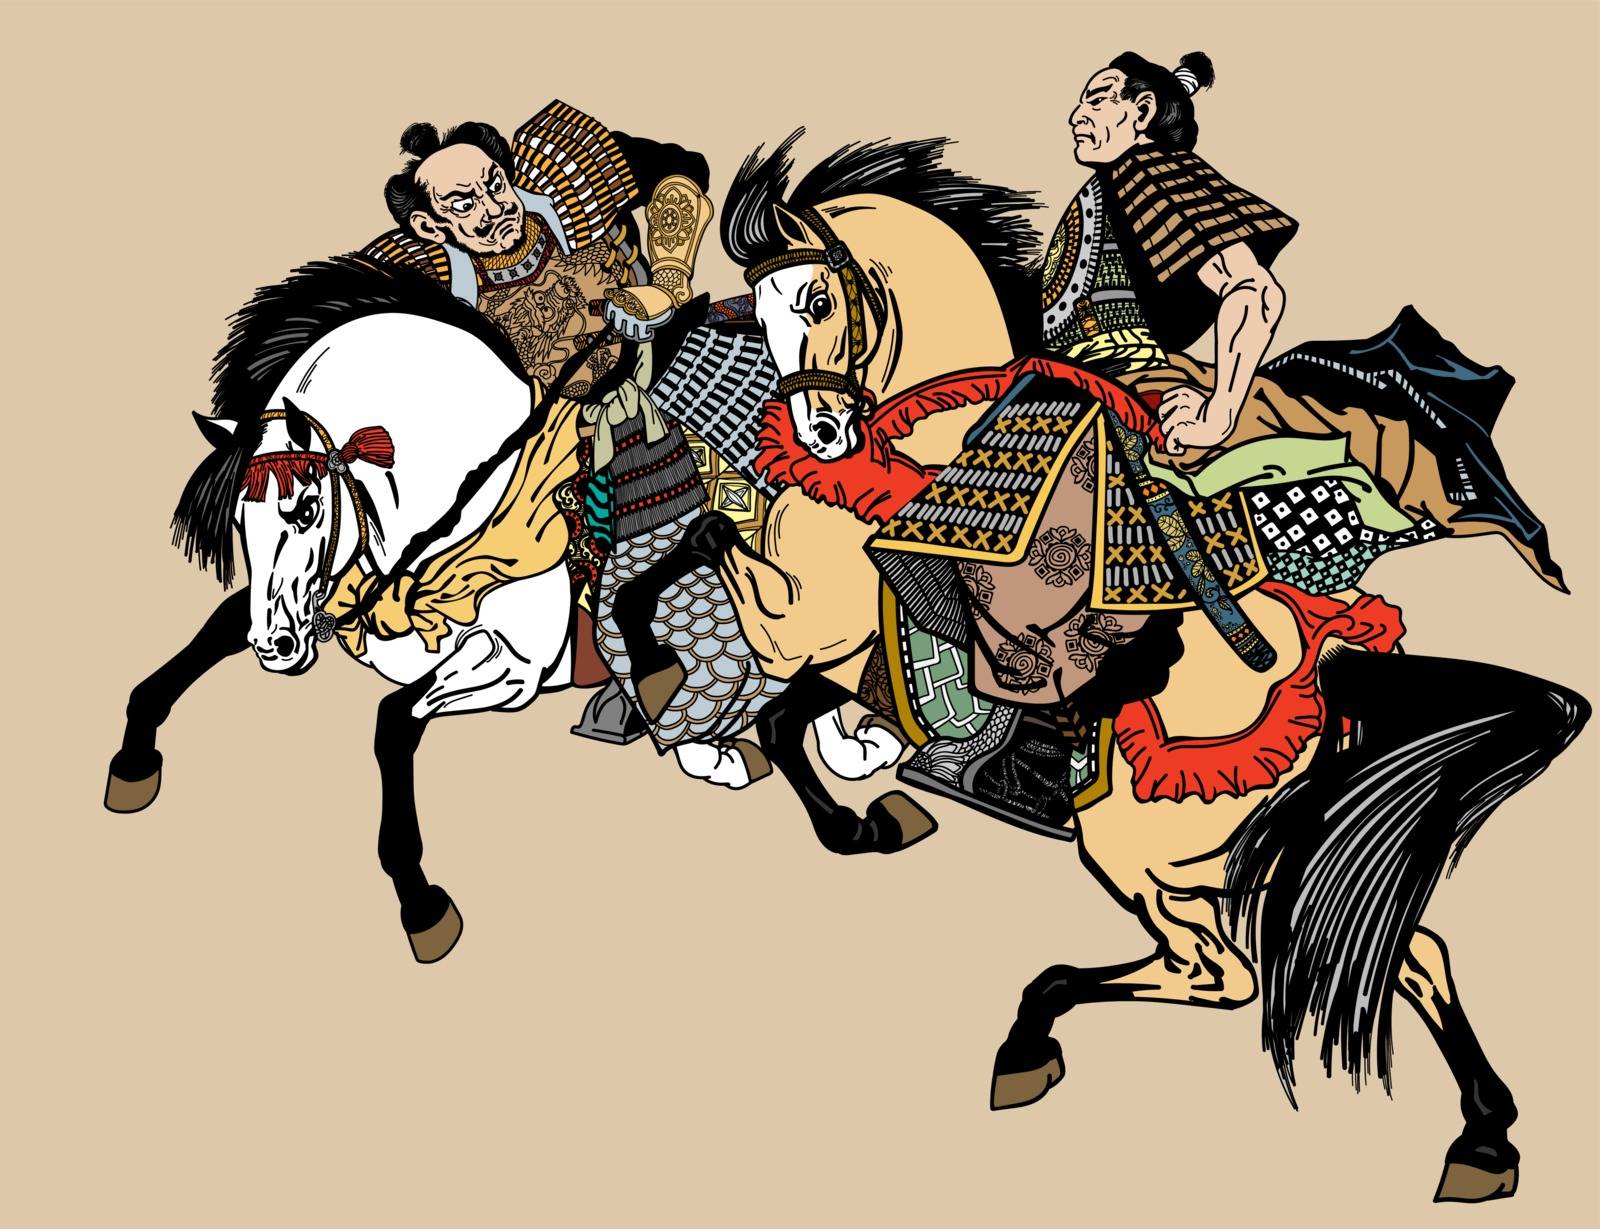 two Japanese Samurai horsemen sitting on horseback and wearing medieval leather armor. East Asia warriors riding pony horses in the gallop. Graphic style vector illustration